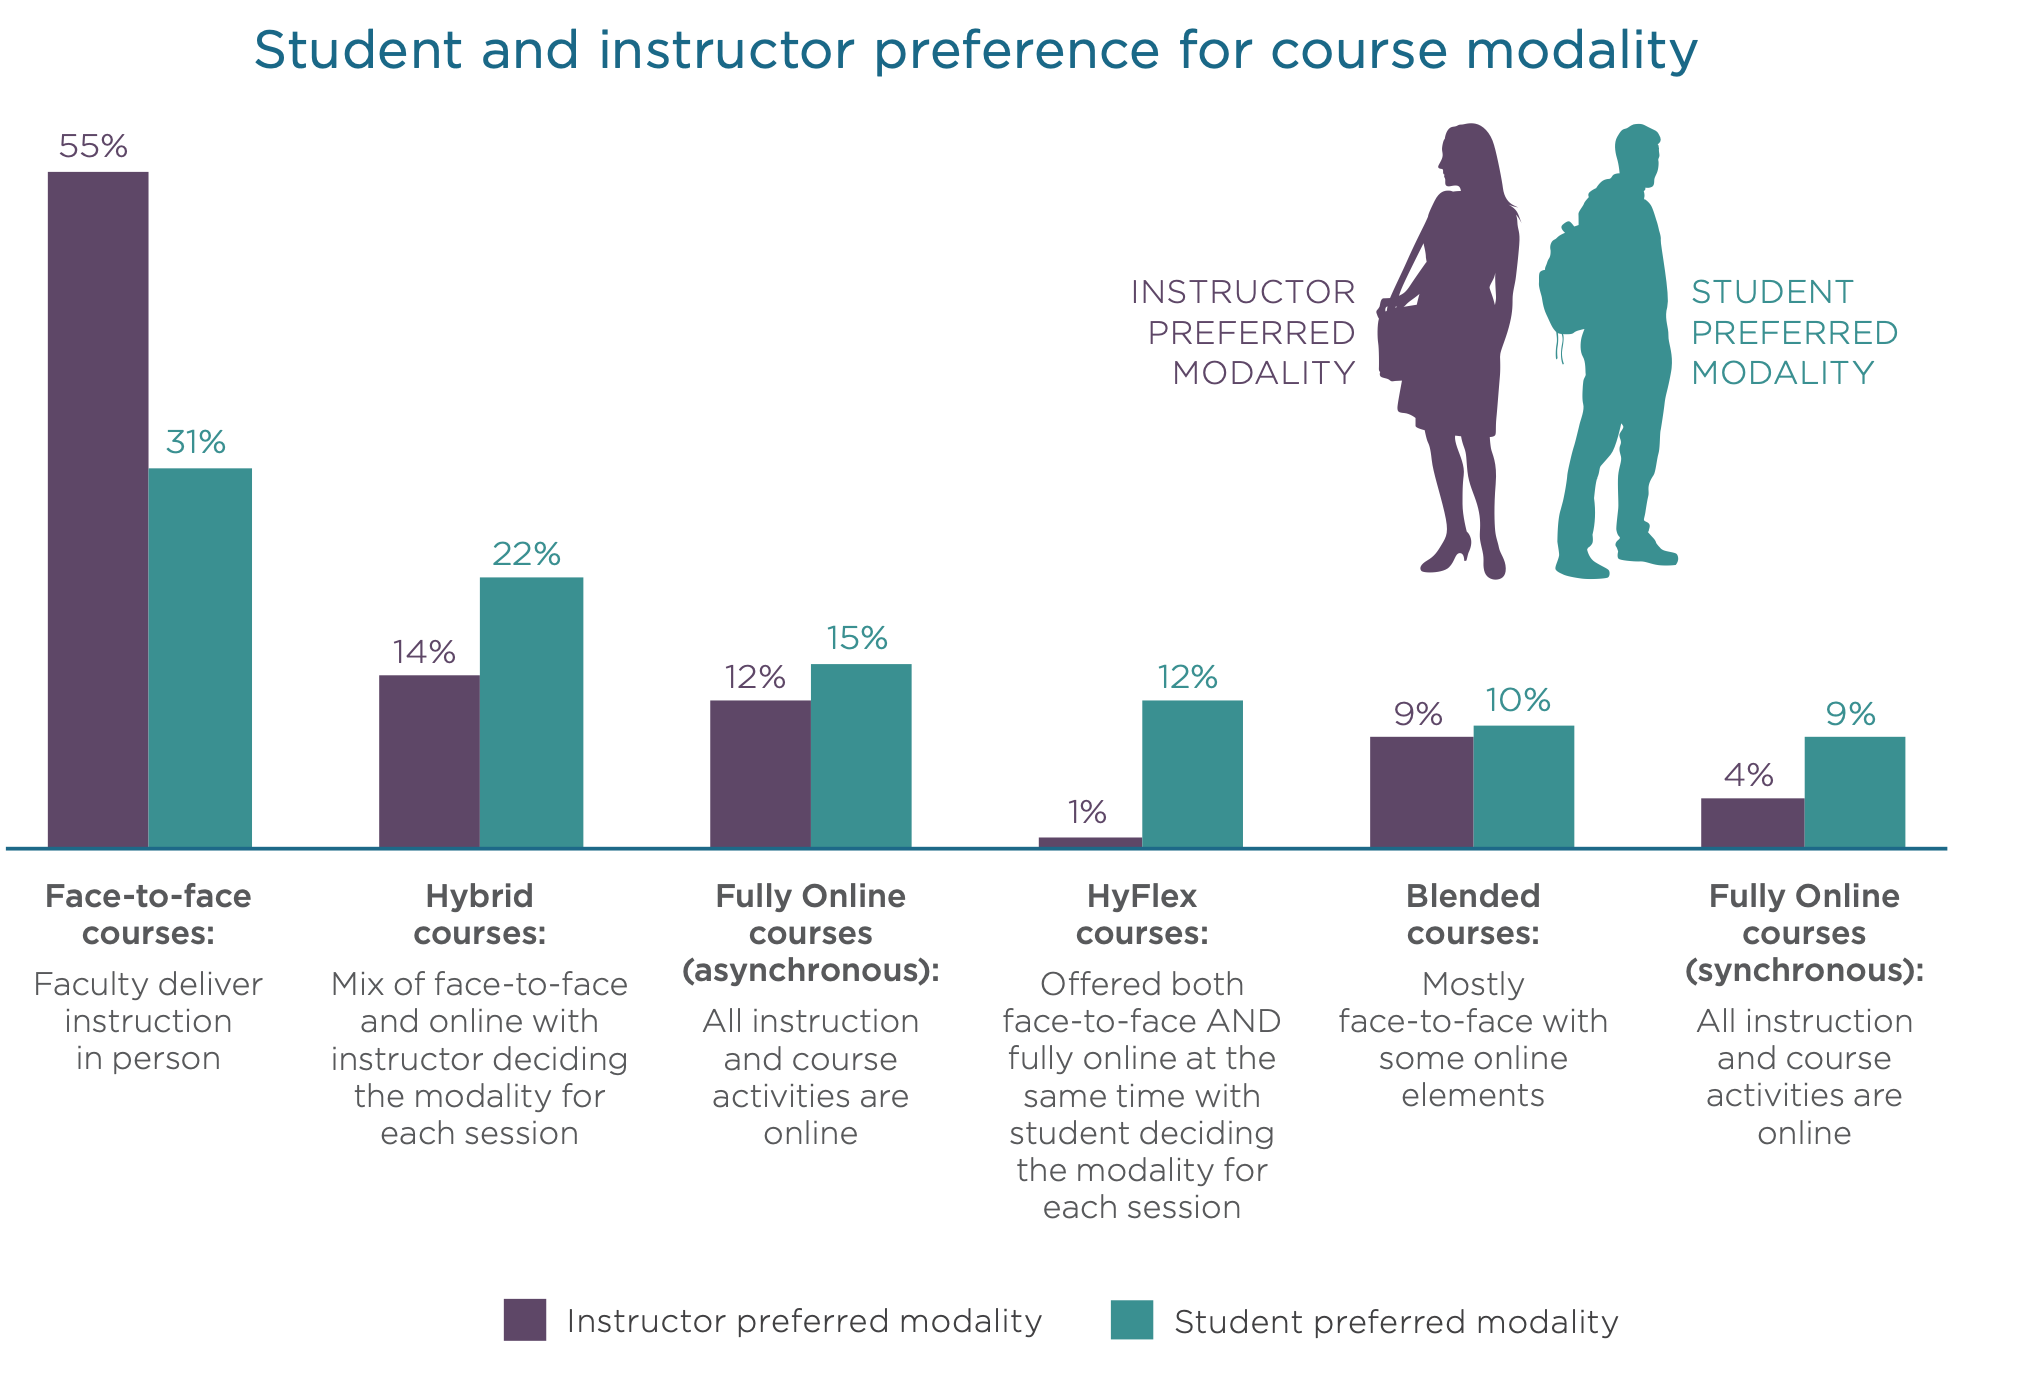 Bar chart showing students' and instructors' preferences for course modality. Respondents could choose face-to-face courses, hybrid courses, fully online courses, HyFlex or blended courses.